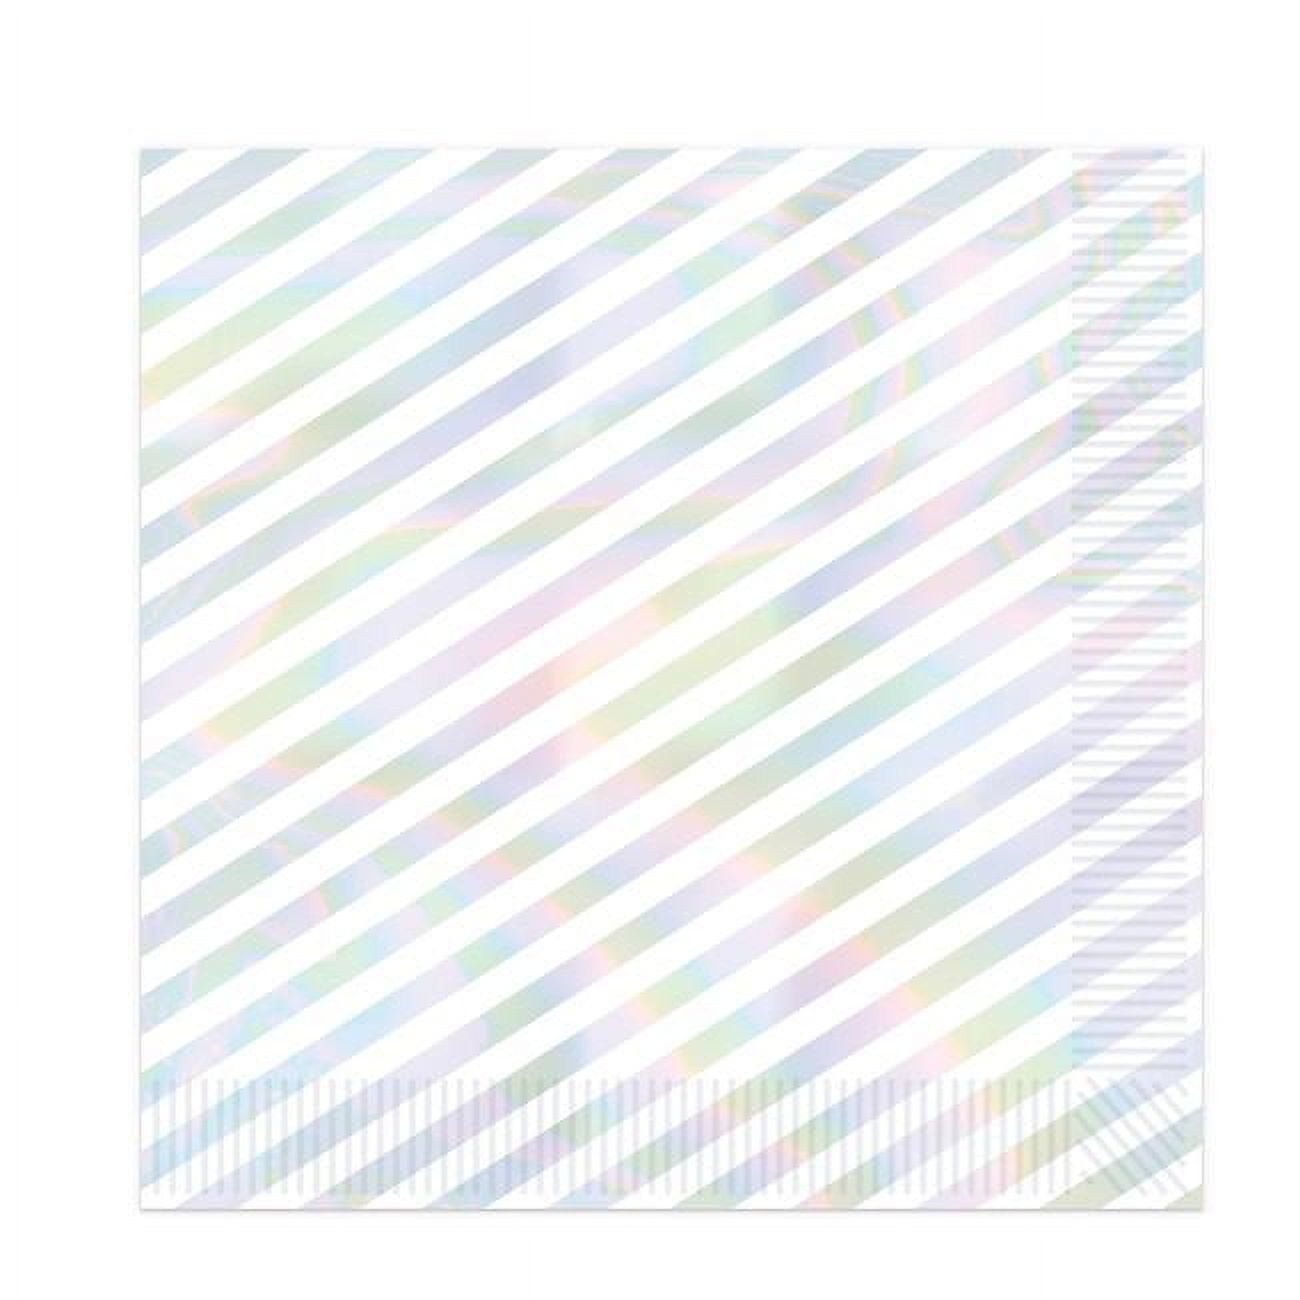 Picture of Beistle 53574 2-Ply Iridescent Stripes Luncheon Napkins - Pack of 12